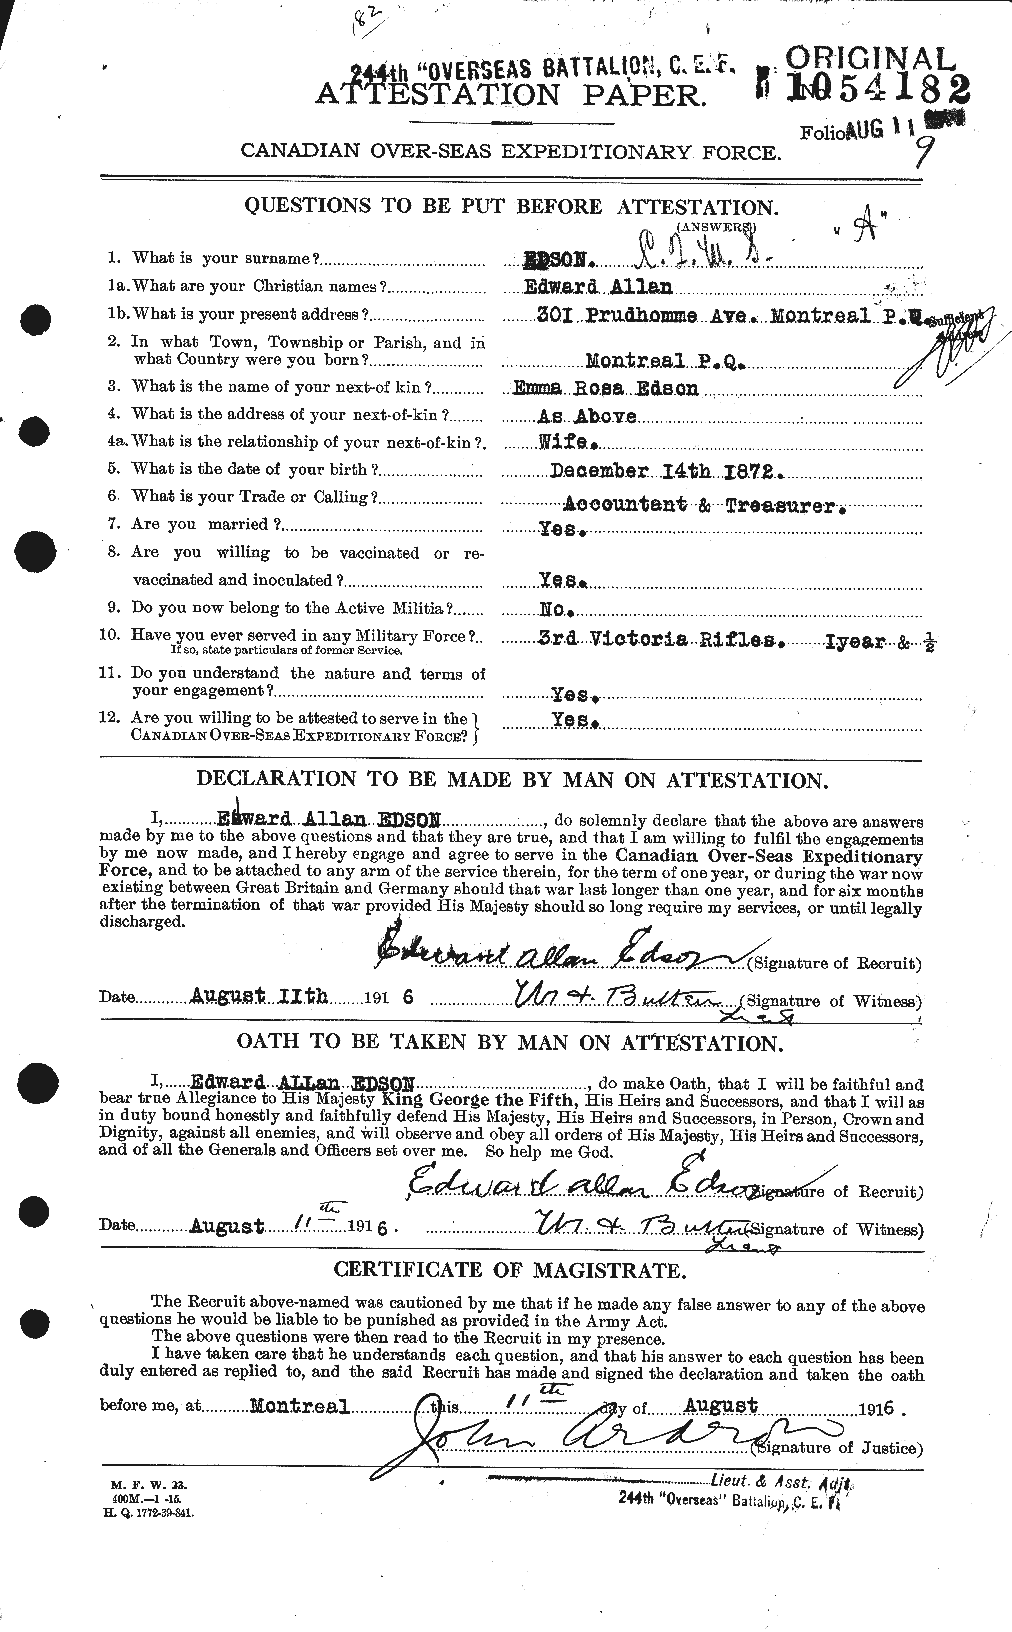 Personnel Records of the First World War - CEF 313033a